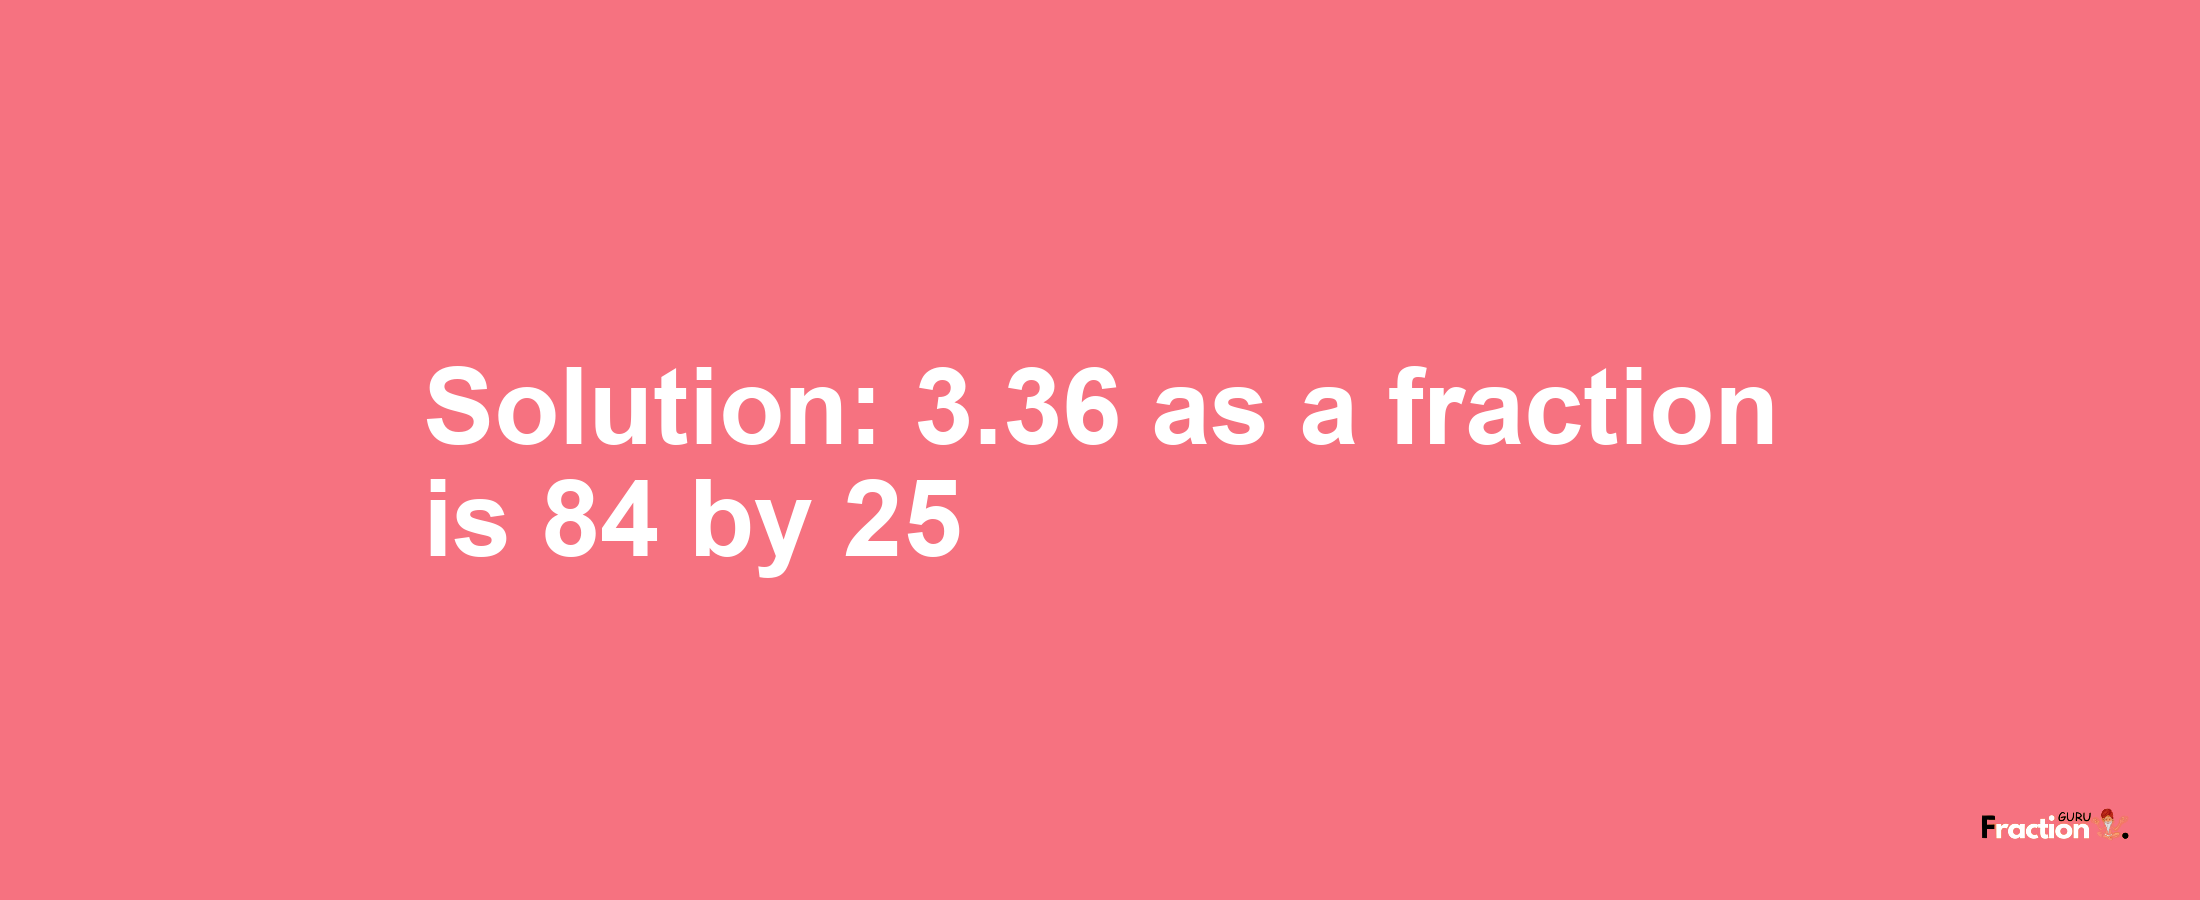 Solution:3.36 as a fraction is 84/25